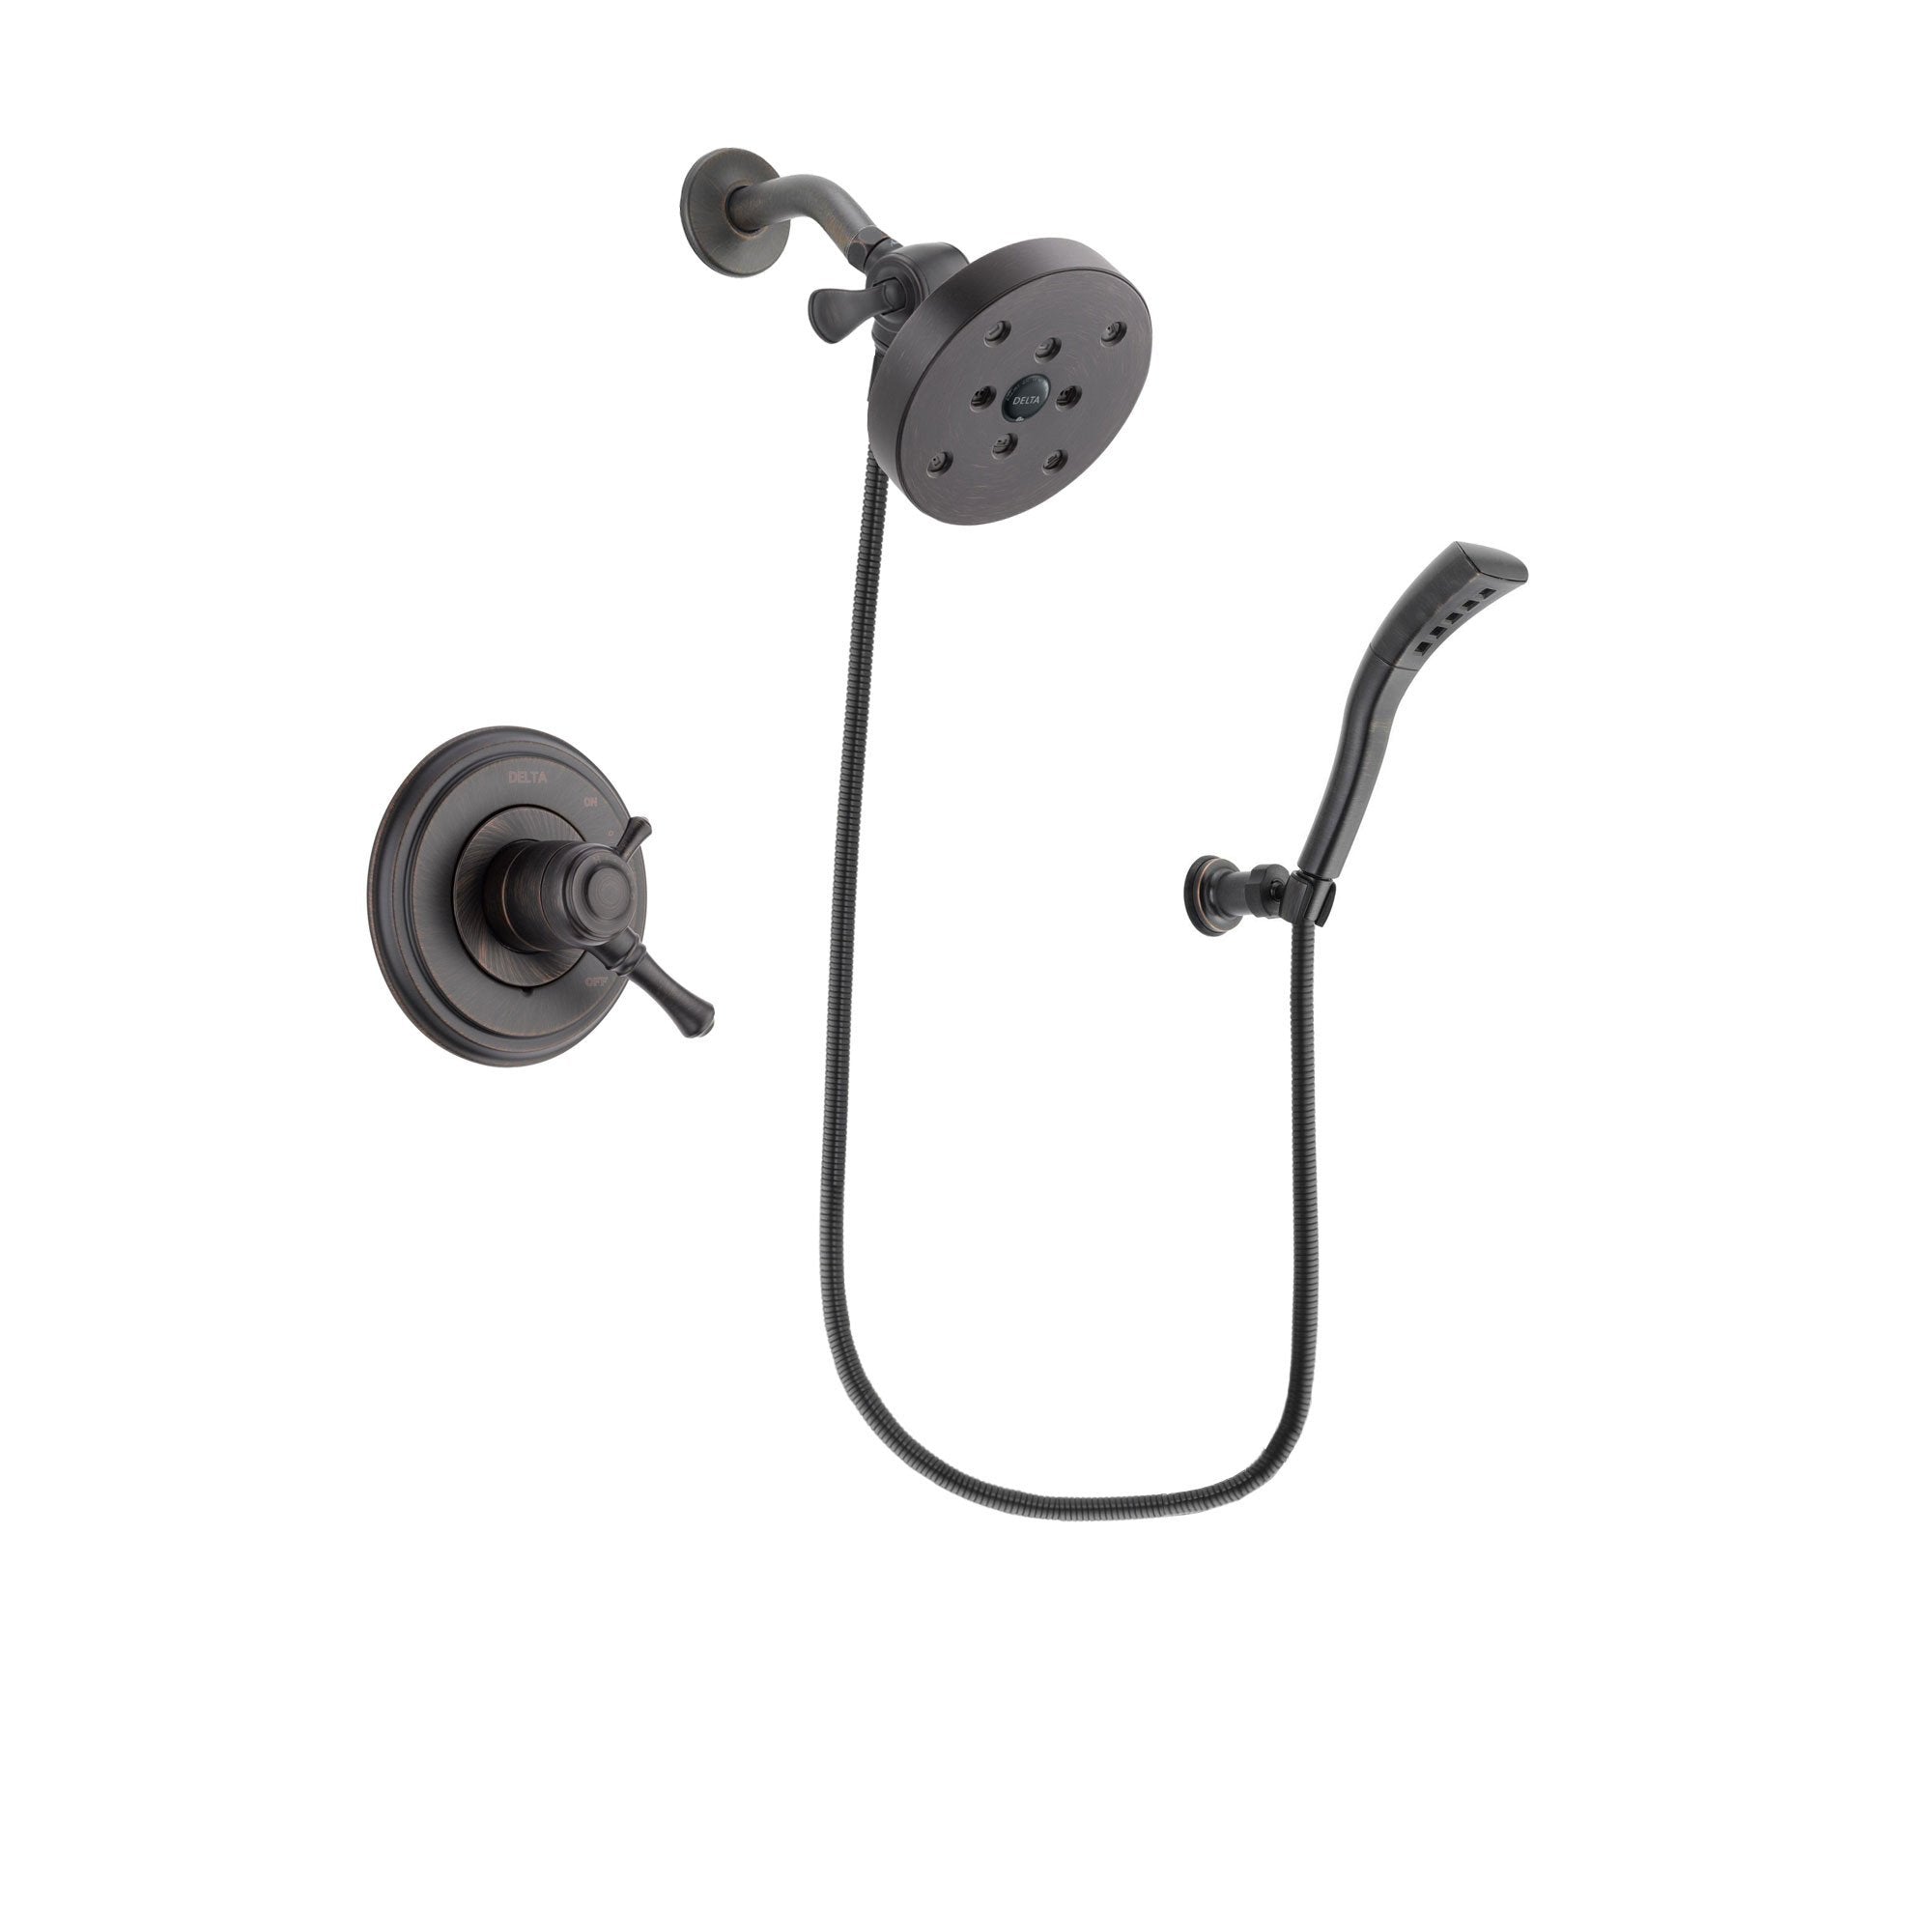 Delta Cassidy Venetian Bronze Finish Dual Control Shower Faucet System Package with 5-1/2 inch Showerhead and Modern Wall Mount Personal Handheld Shower Spray Includes Rough-in Valve DSP2980V